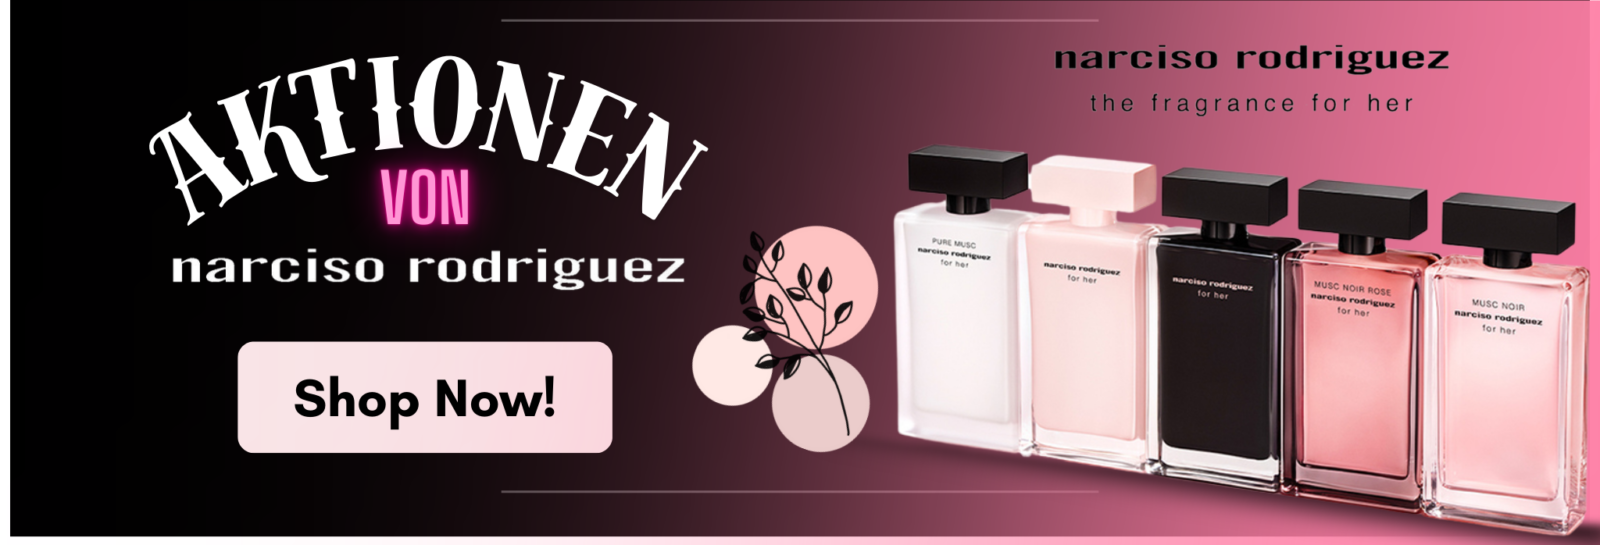 Free Shop Swiss Narciso Rodriguez In Aktionen